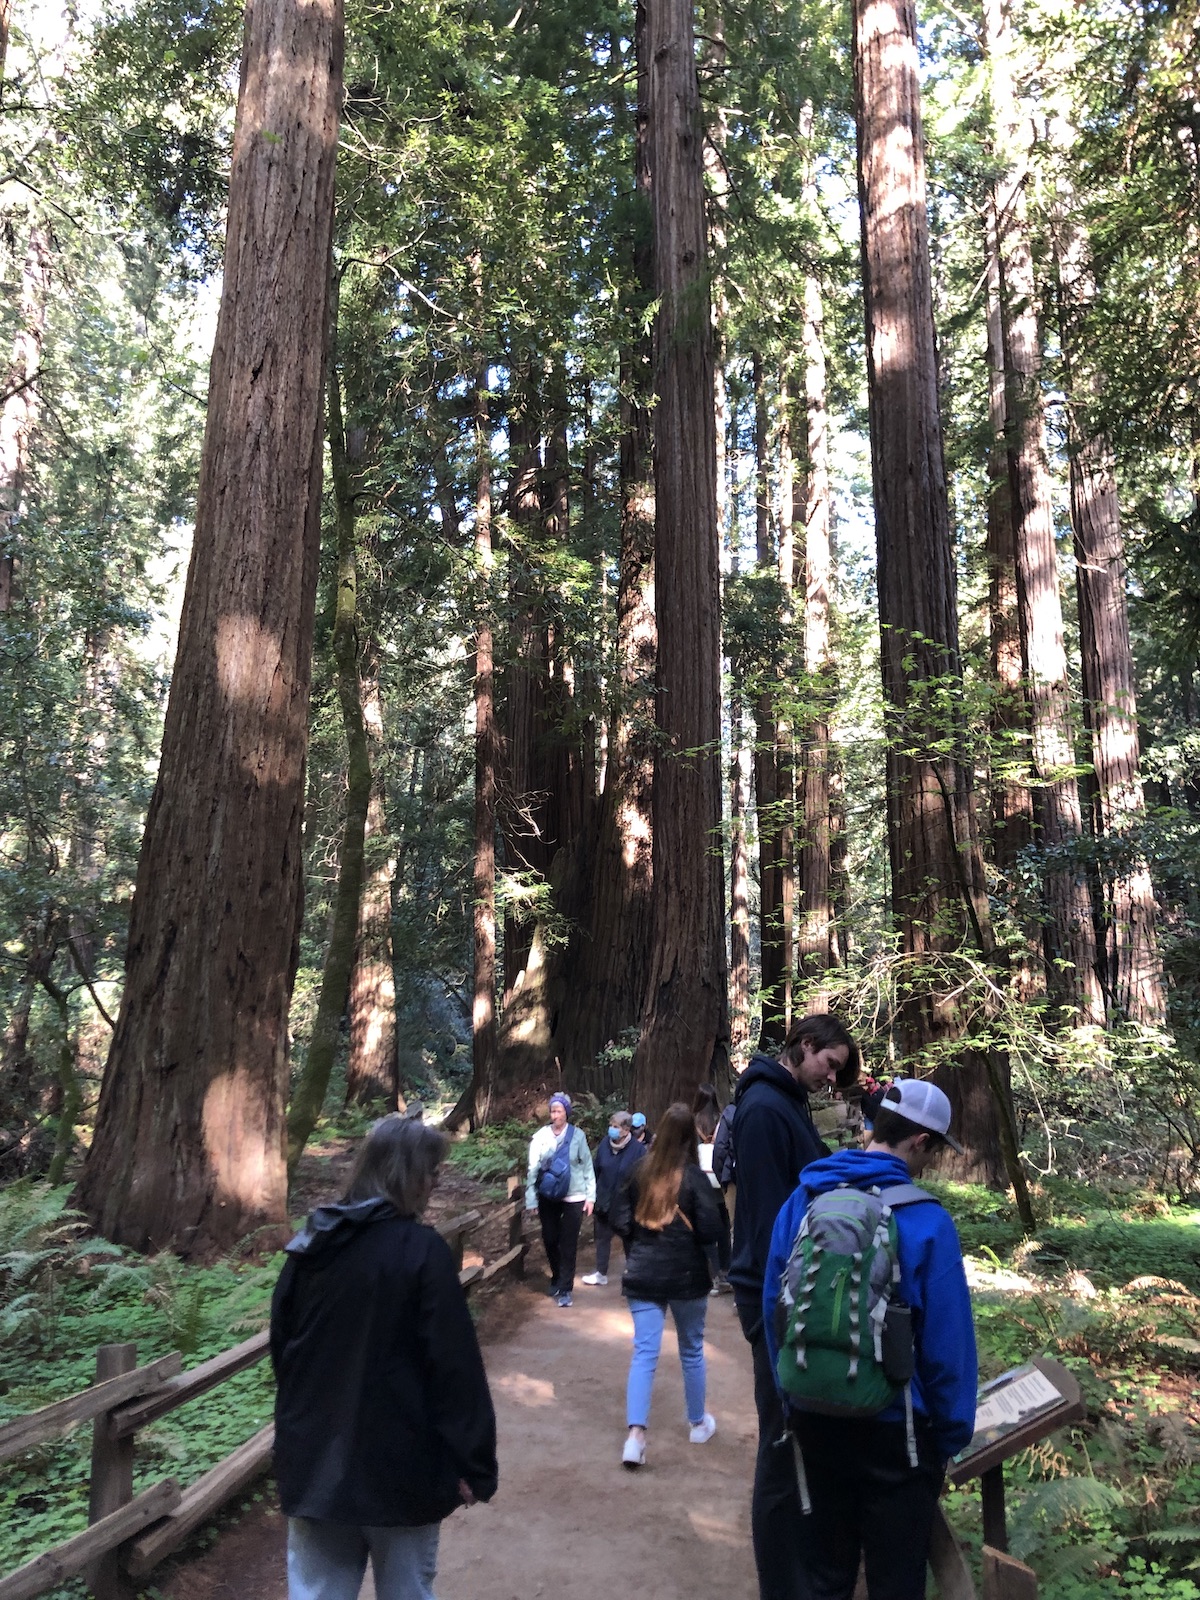 students stop to read an information plaque along a busy footpath through a forest of immense redwood trees.